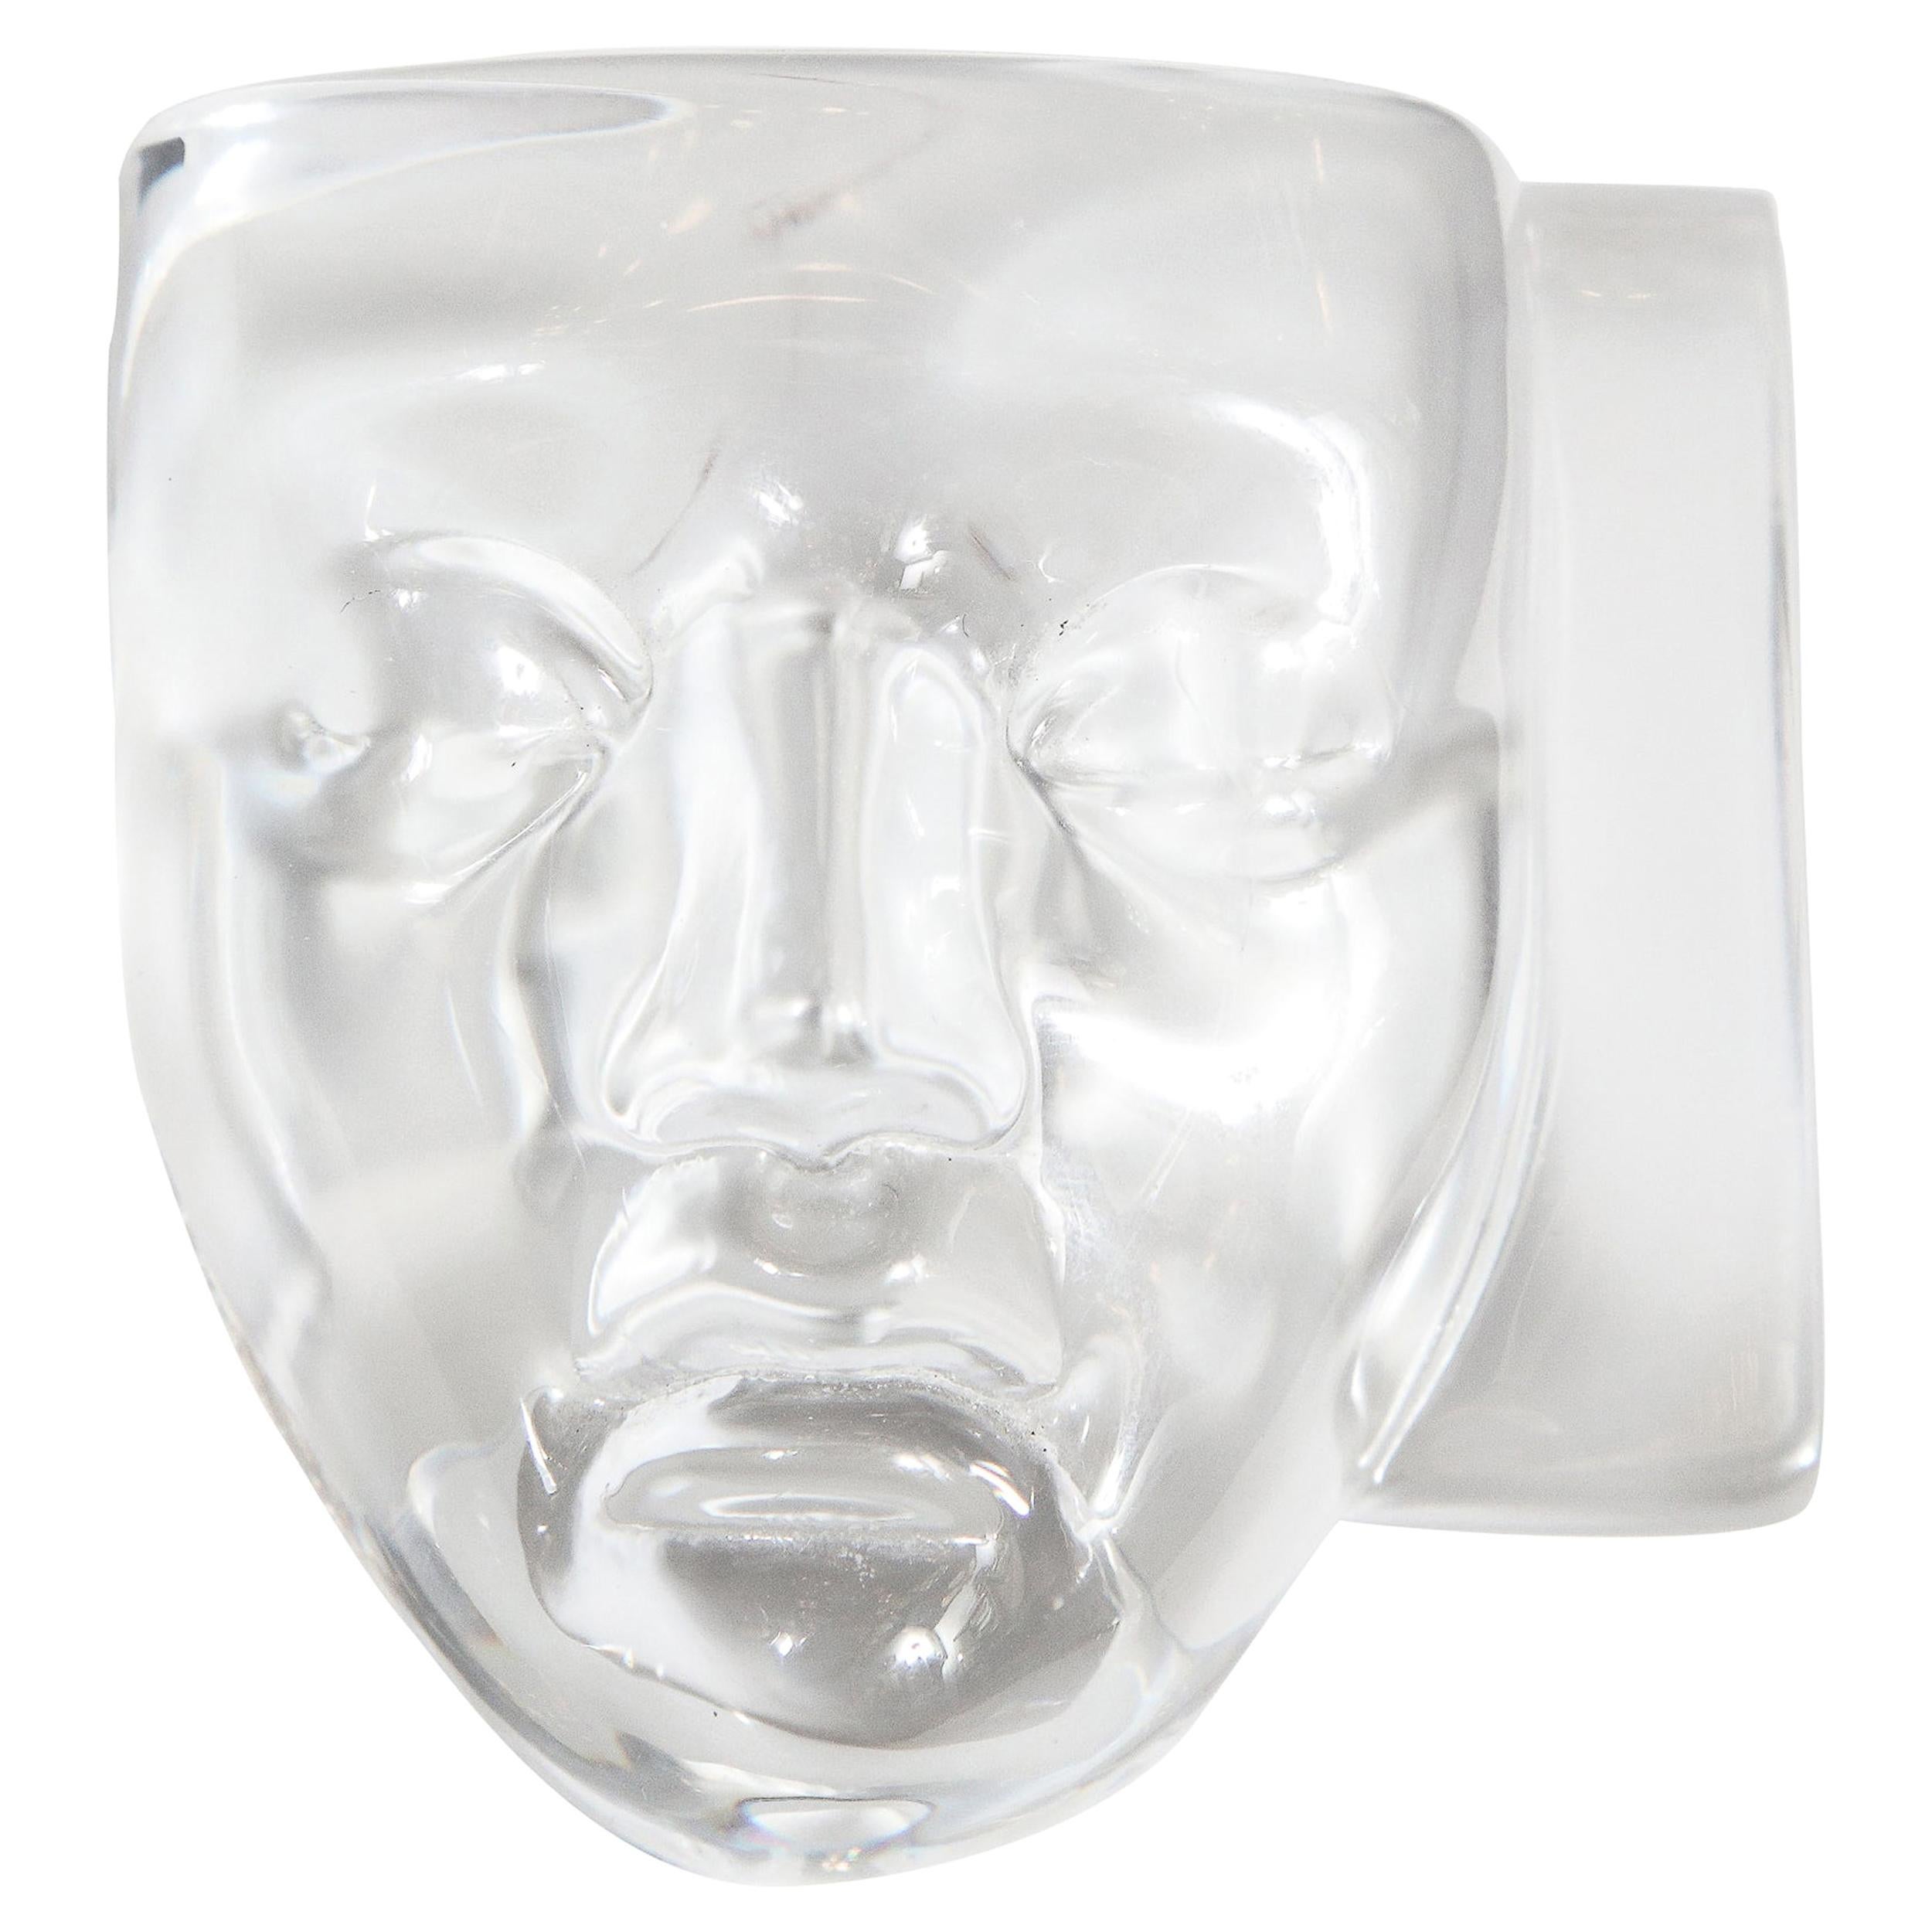 Modernist Translucent and Frosted Glass Masks Paperweight Signed by Daum France